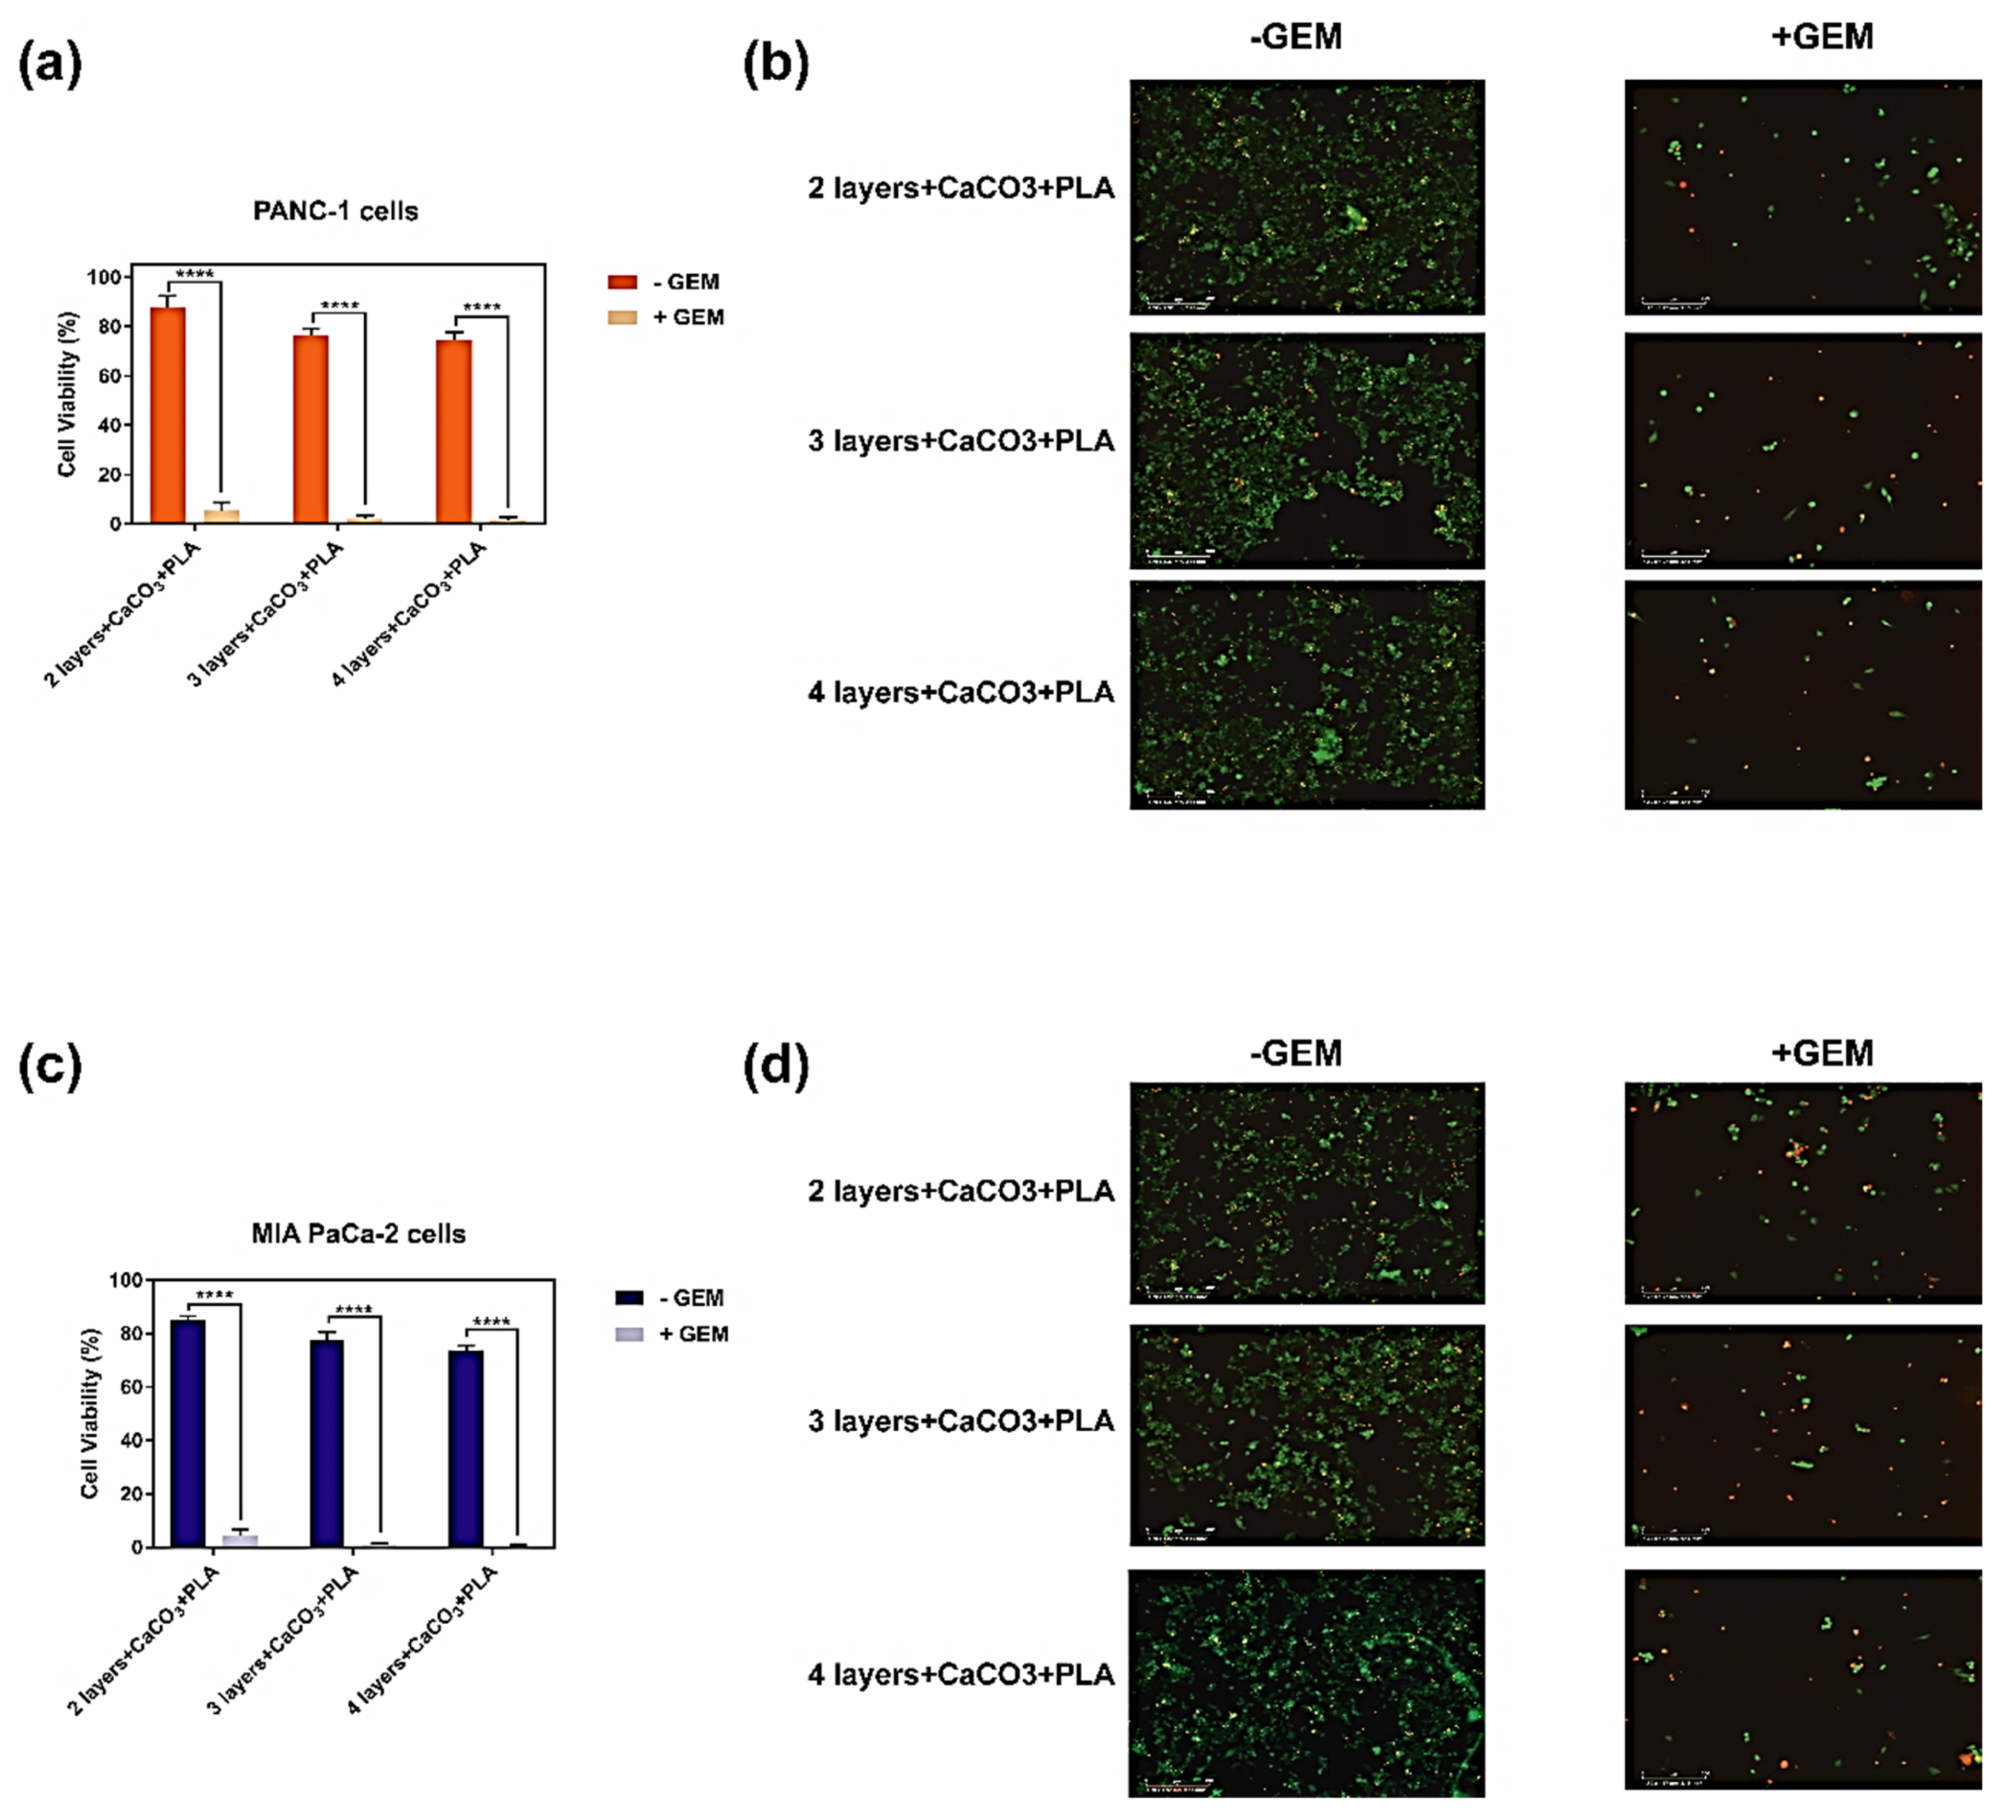 In vitro biocompatibility of PLA coated 3D printed coaxial patches containing CaCO3 either without Gemcitabine (- GEM), or loaded with Gemcitabine (+ GEM). (a) MTS cell viability assay of PANC-1 human pancreatic adenocarcinoma cells when treated with the patches for 72 h. (b) Corresponding live/dead cell staining of treated PANC-1 human pancreatic adenocarcinoma cells. (c) MTS cell viability assay of MIA-PaCa-2 human pancreatic adenocarcinoma cells when treated with the patches for 72 h. (d) Corresponding live/dead cell staining of treated MIA-PaCa-2 human pancreatic adenocarcinoma cells. Values are the mean (±SEM) of quadruplicate. **** p = 0.0001.